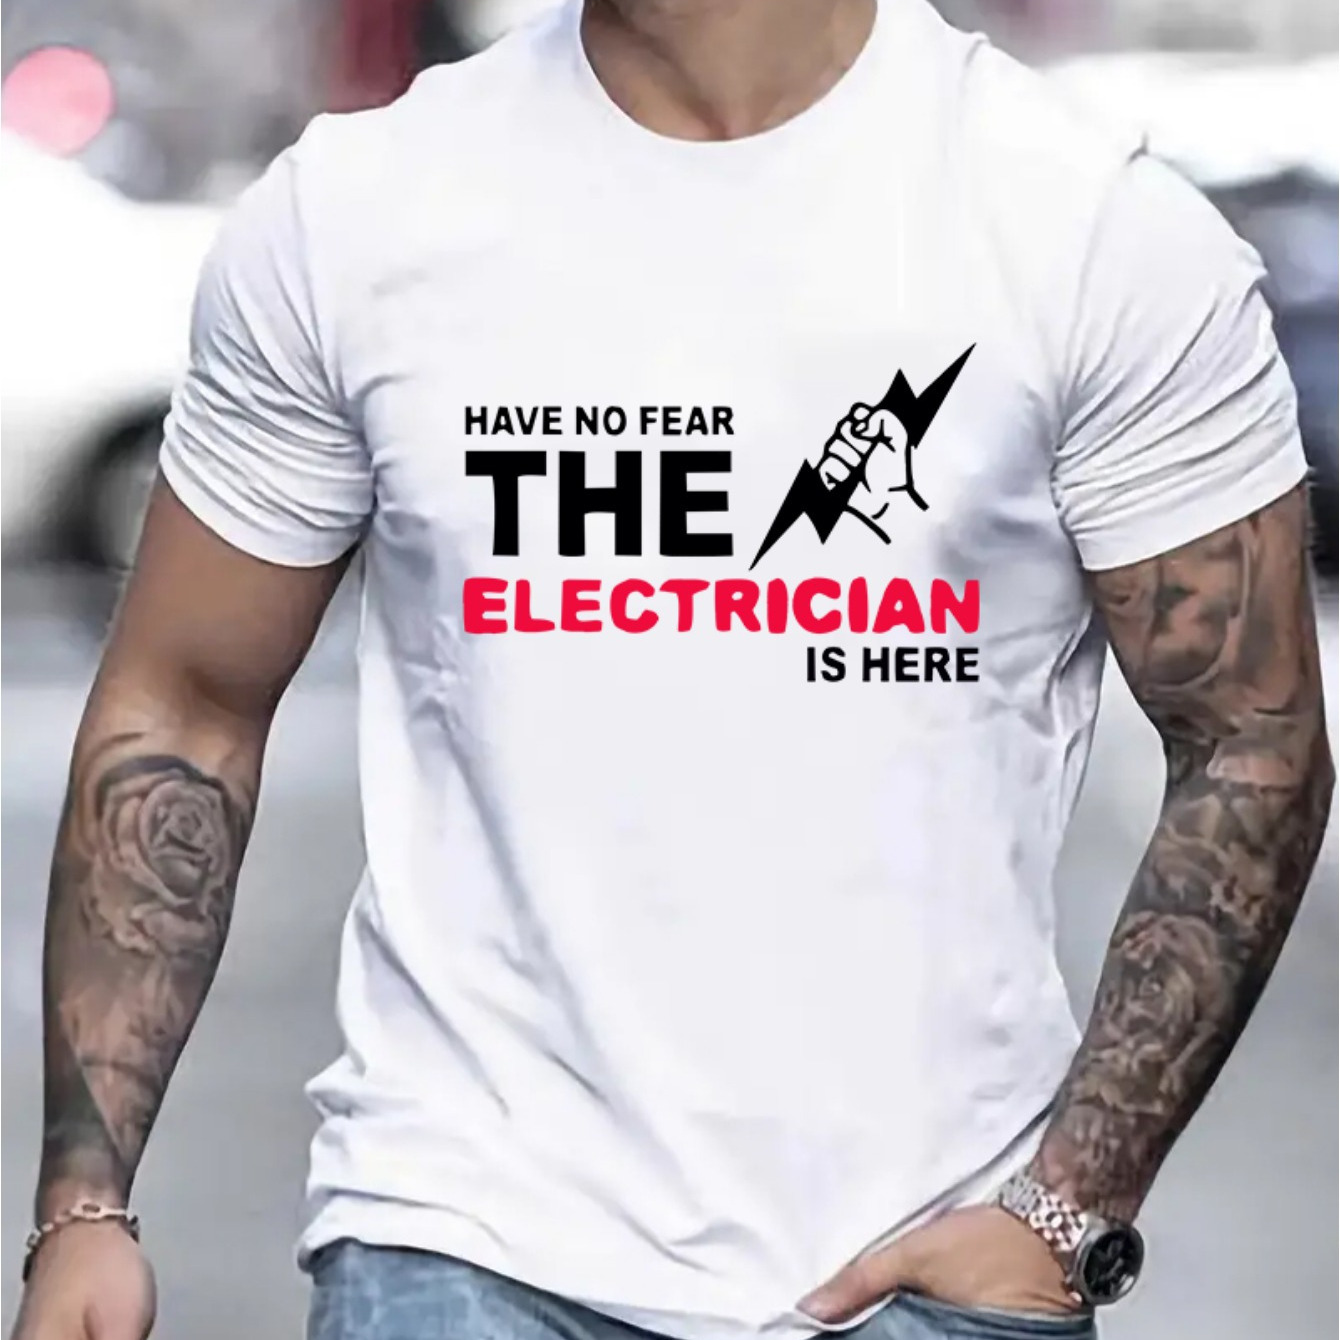 

Have No Fear The Electrician Is Here And Anime Hand Holding Lightening Graphic Print, Men's Novel Graphic Design T-shirt, Casual Comfy Tees For Summer, Men's Clothing Tops For Daily Activities